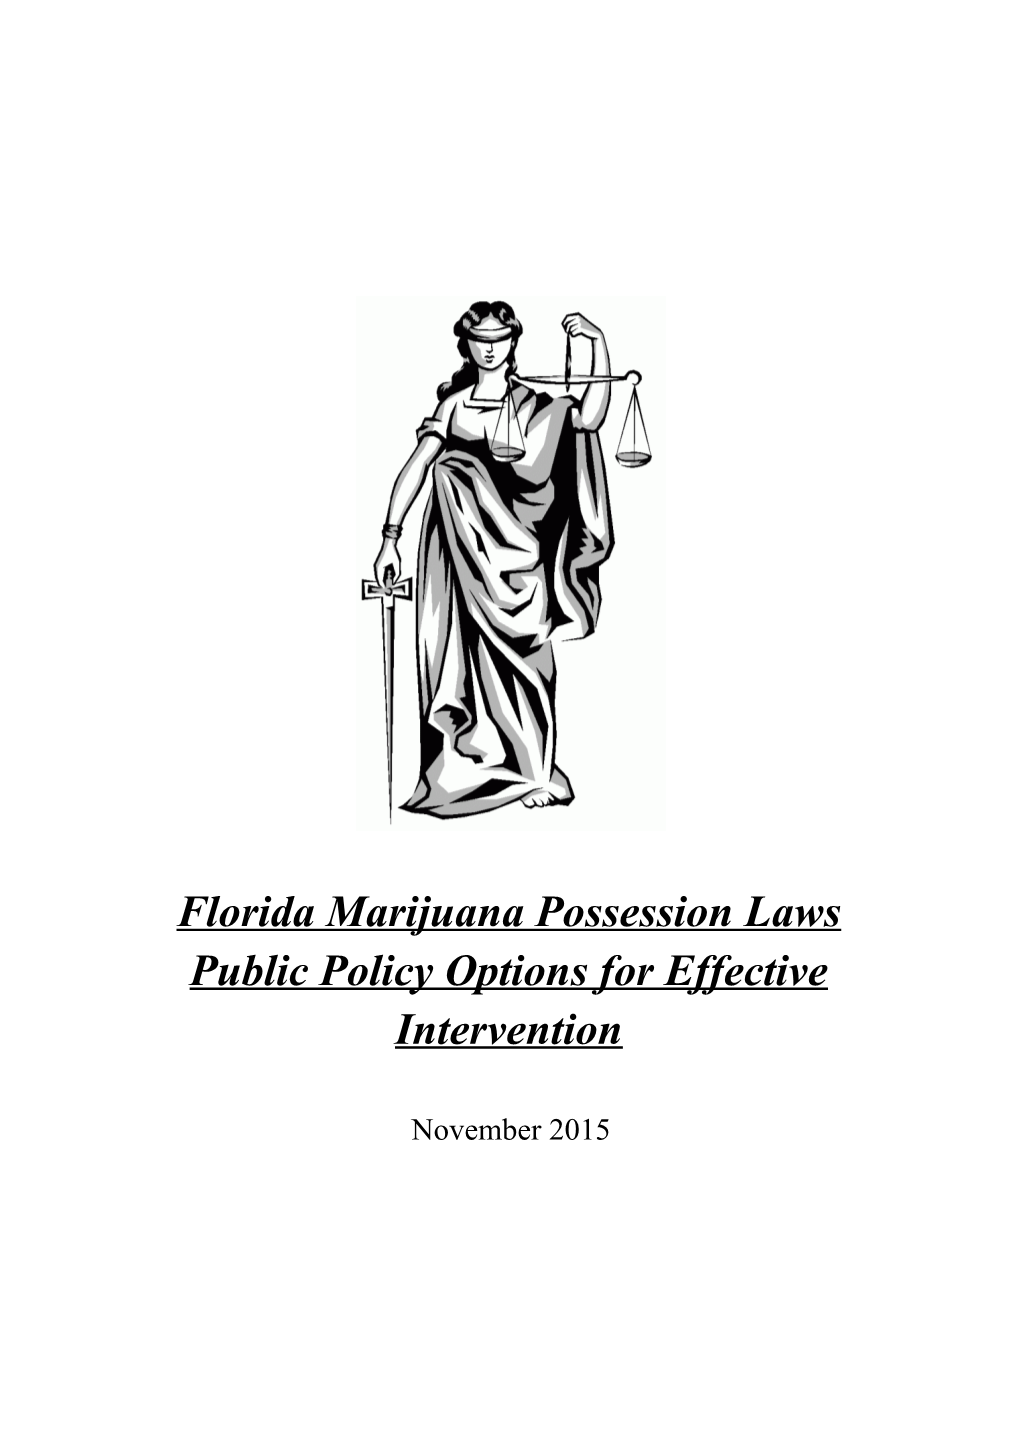 Public Policy Options for Effective Intervention